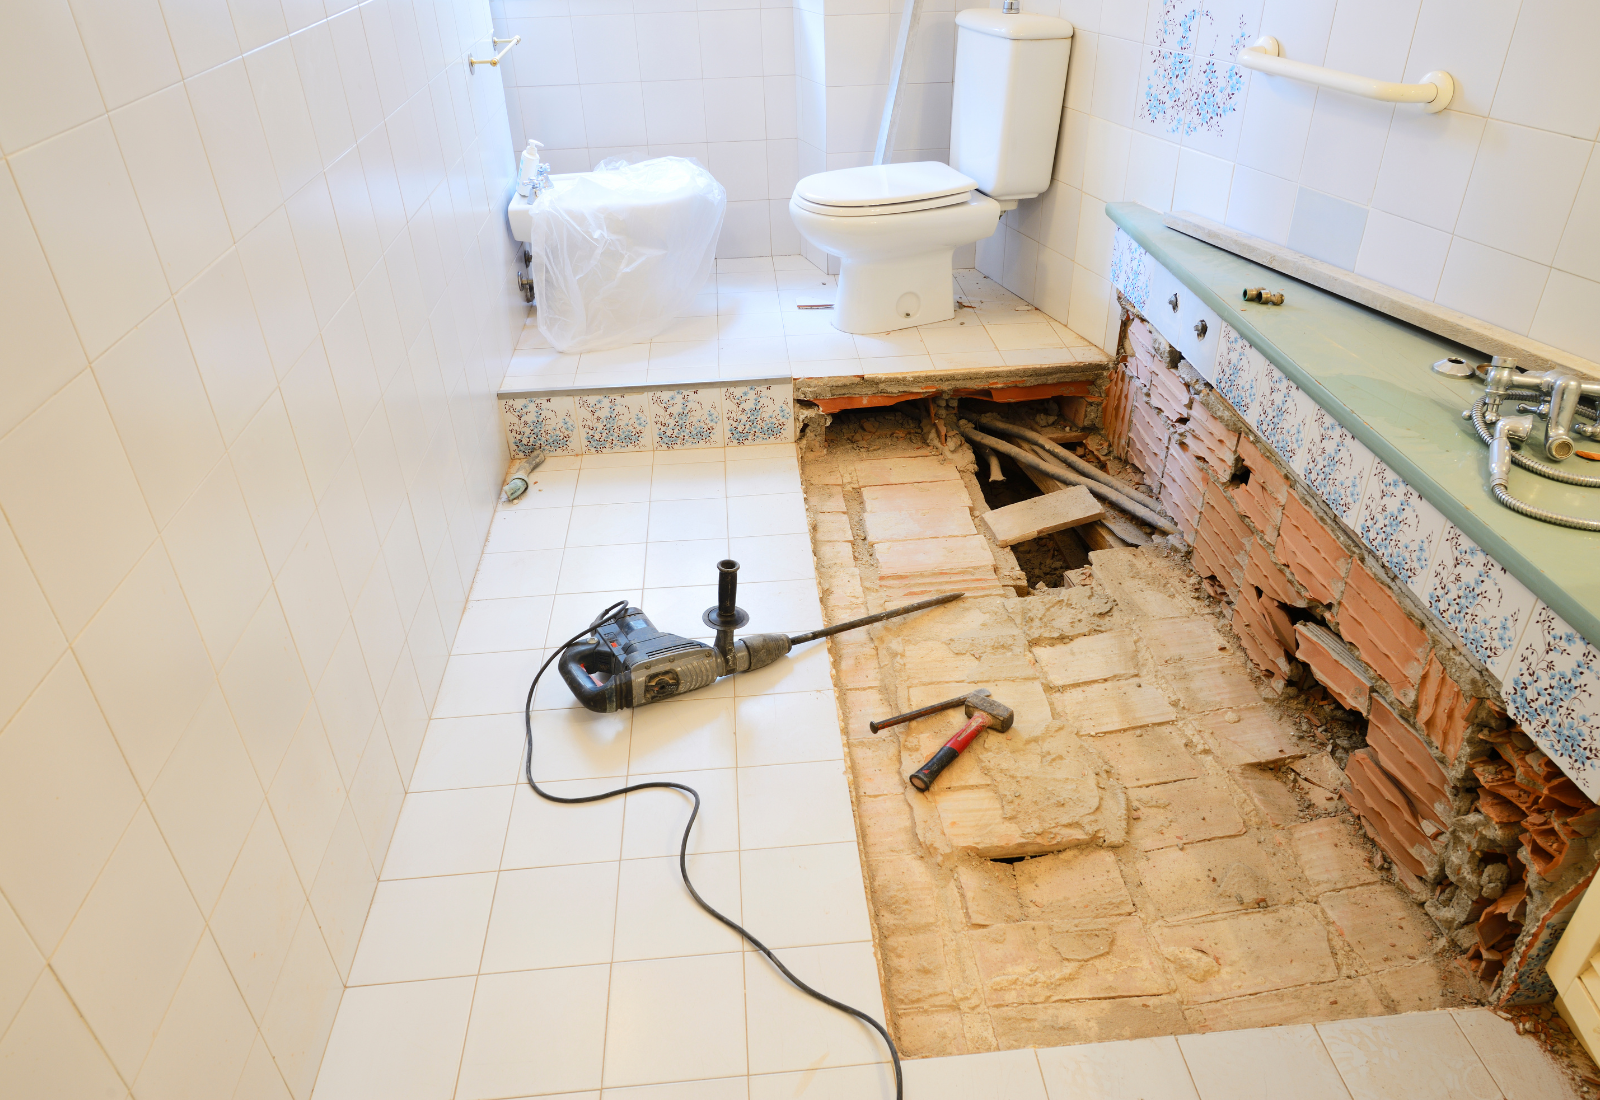 Image of a remodeling project